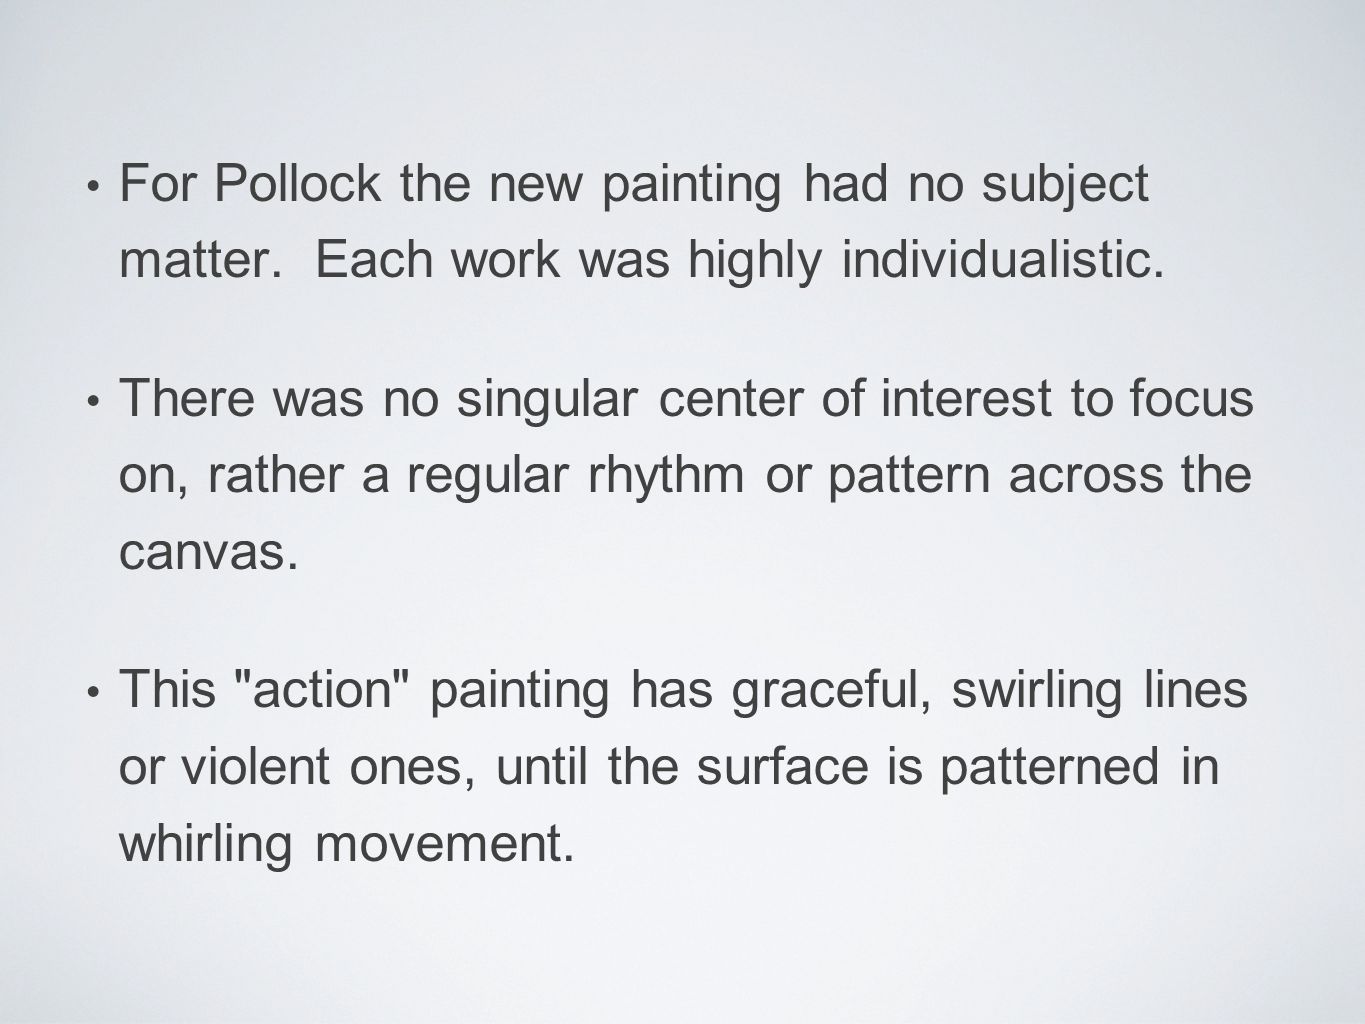 For Pollock the new painting had no subject matter.